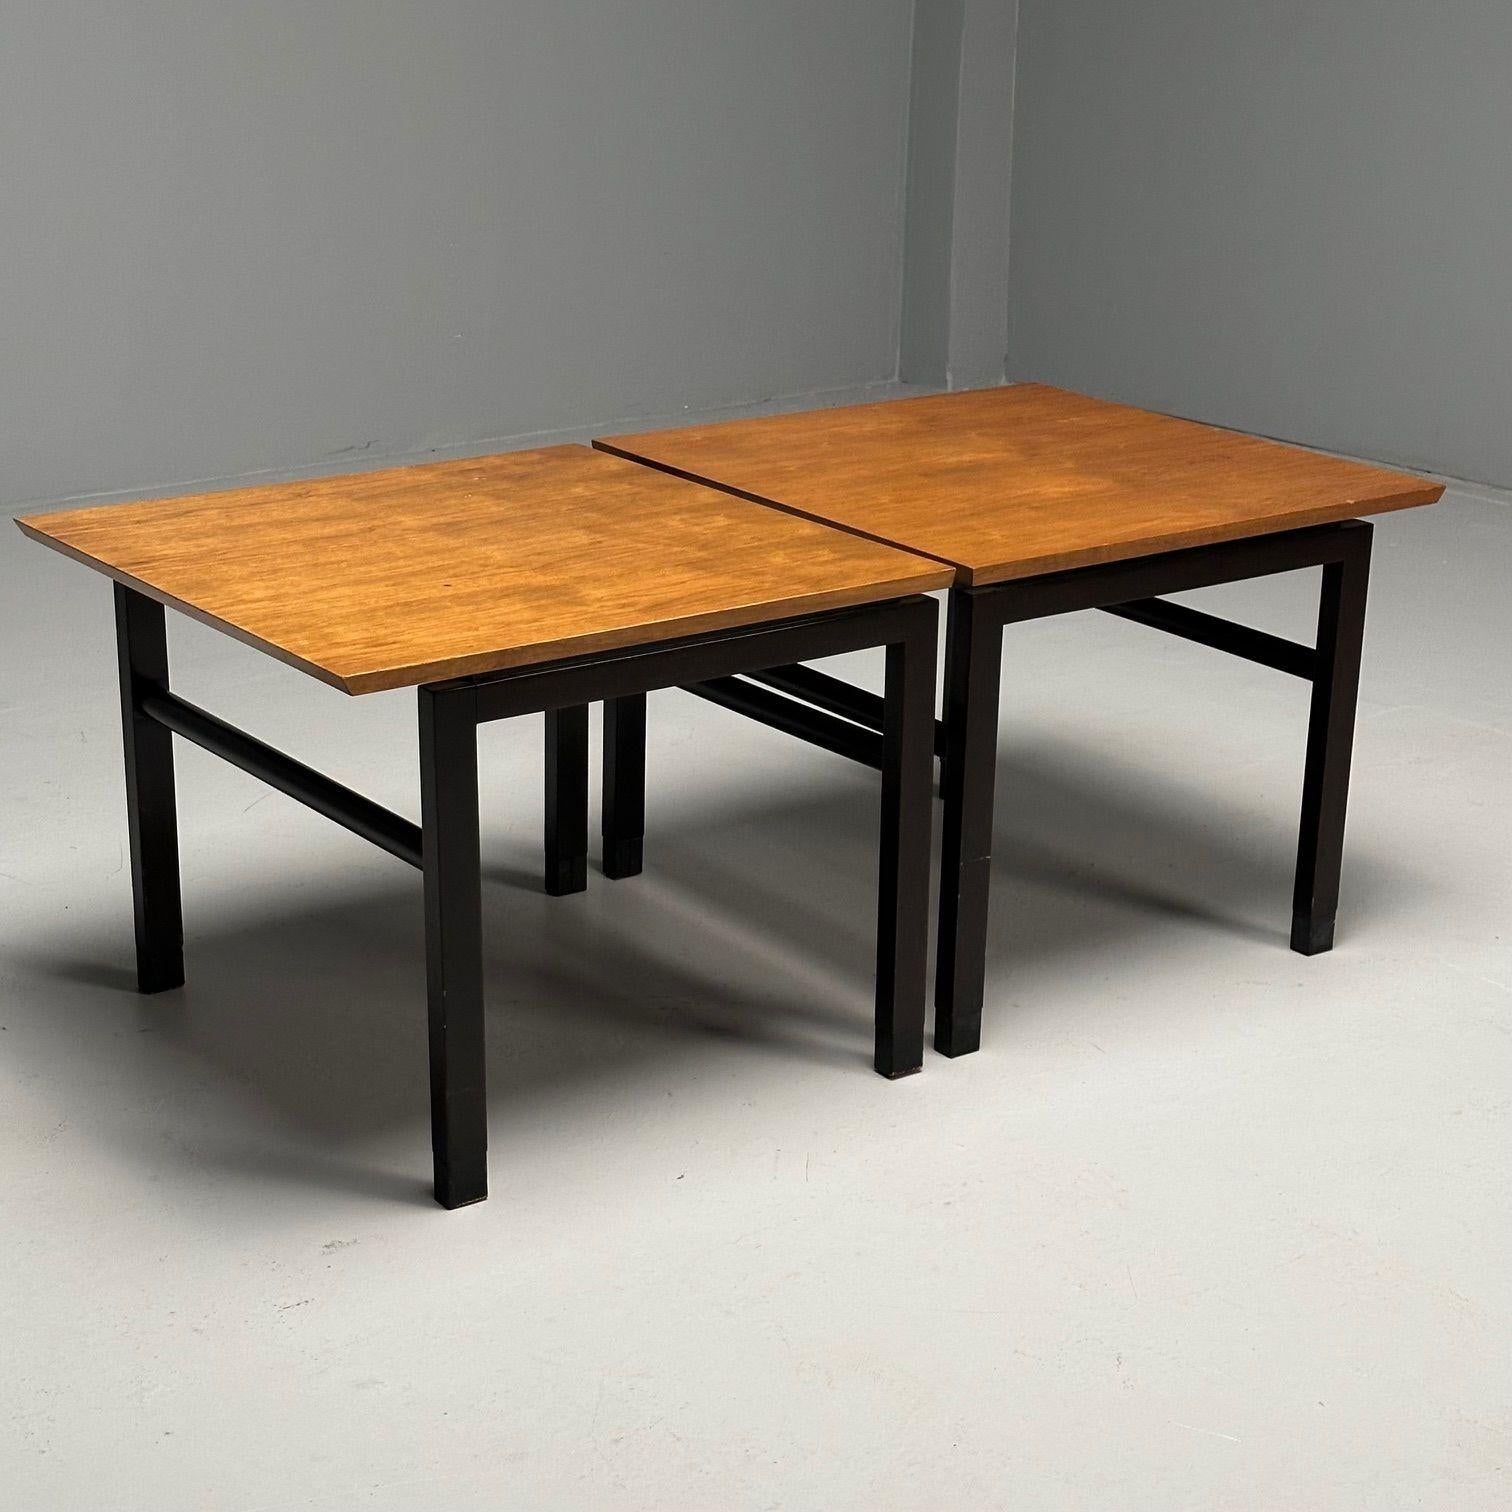 Dunbar, Mid-Century Modern, Side Tables, Metal, Walnut, USA, 1970s

Pair of mid-century modern side or end tables with metal frames and walnut tops. Each table bears their original Dunbar manufacturer label on the underside. Likely designed by